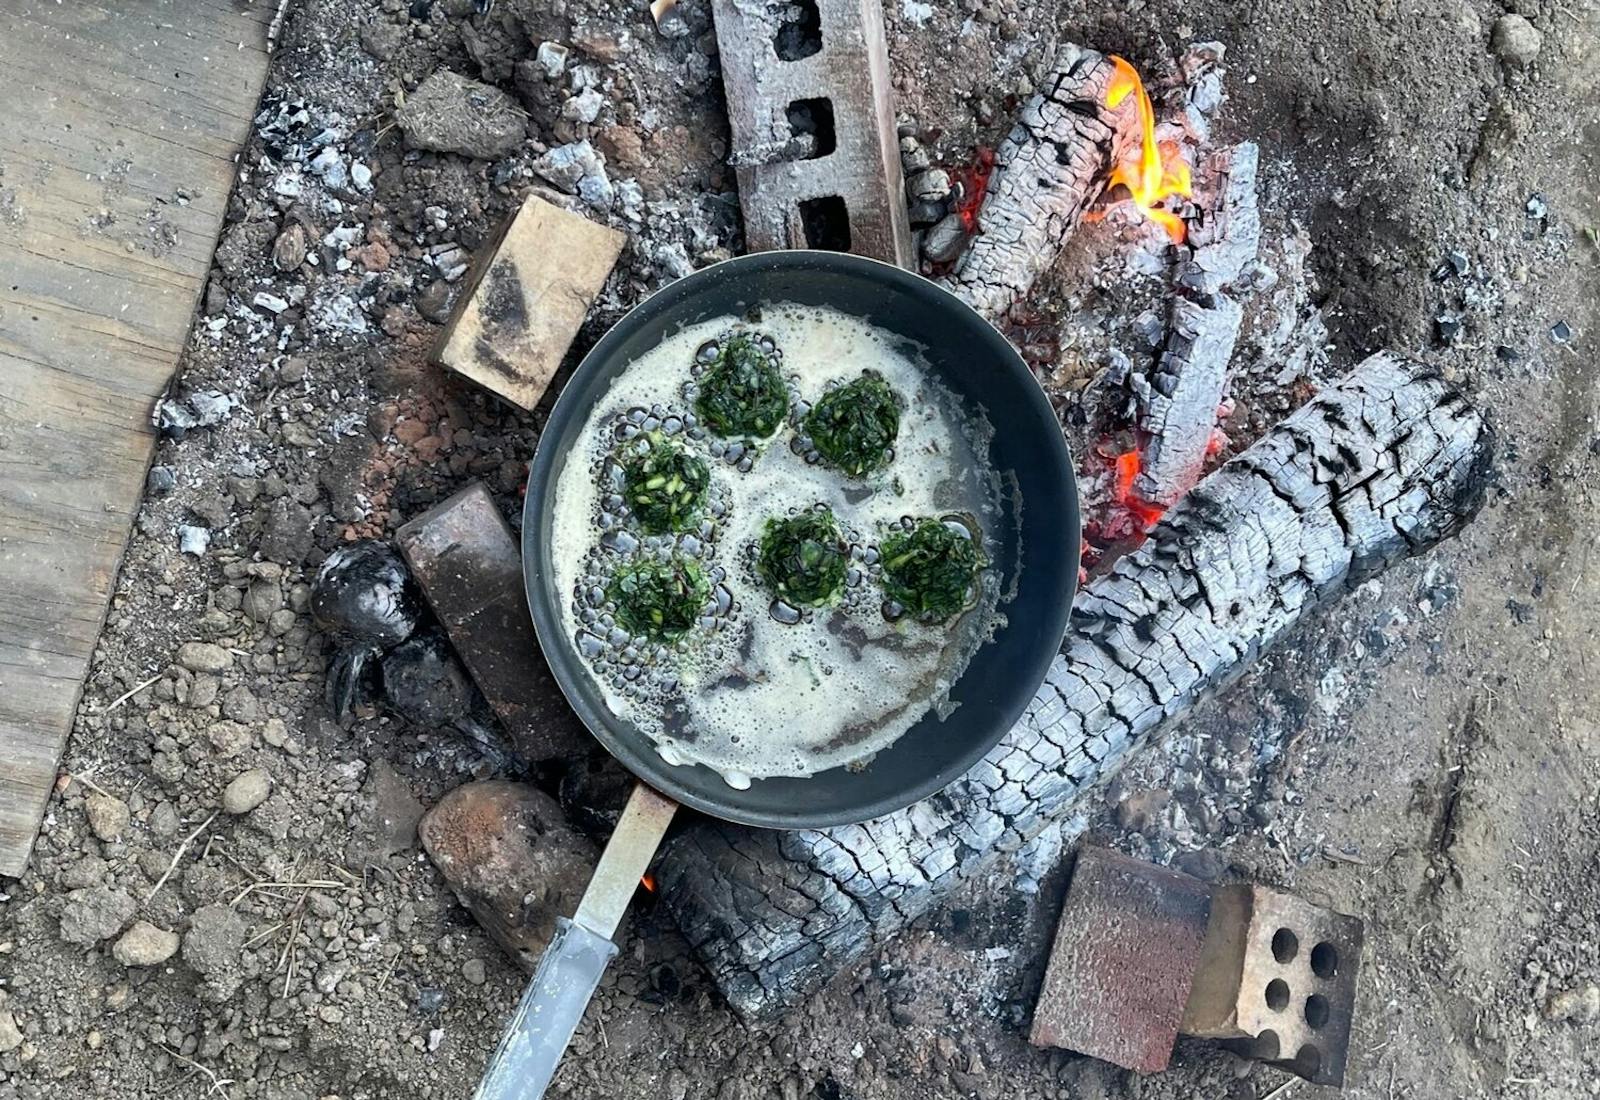 Outdoor campfire scene with pan of fritters frying in oil. 